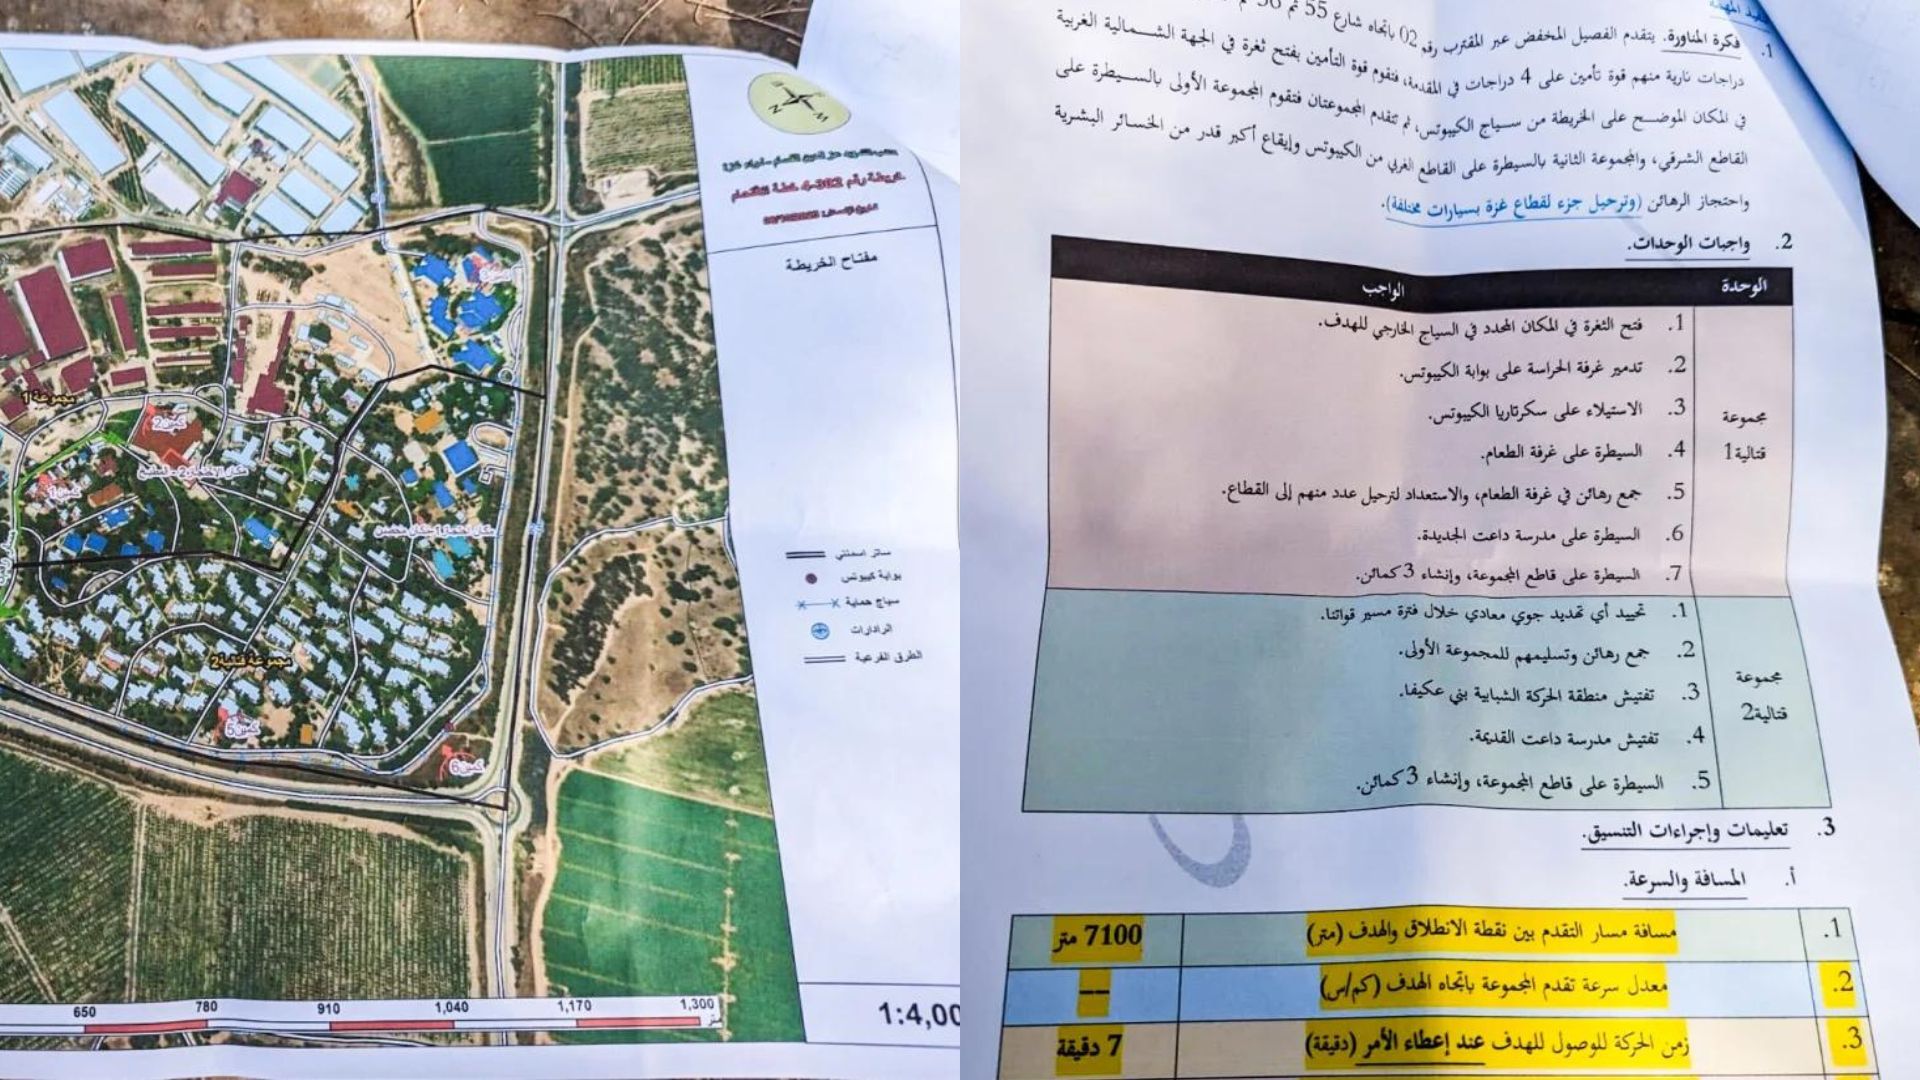 Kibbutz Kfar Aza massacre NBC: “Detailed maps and plans were found to attack schools and youth centers” – Documents